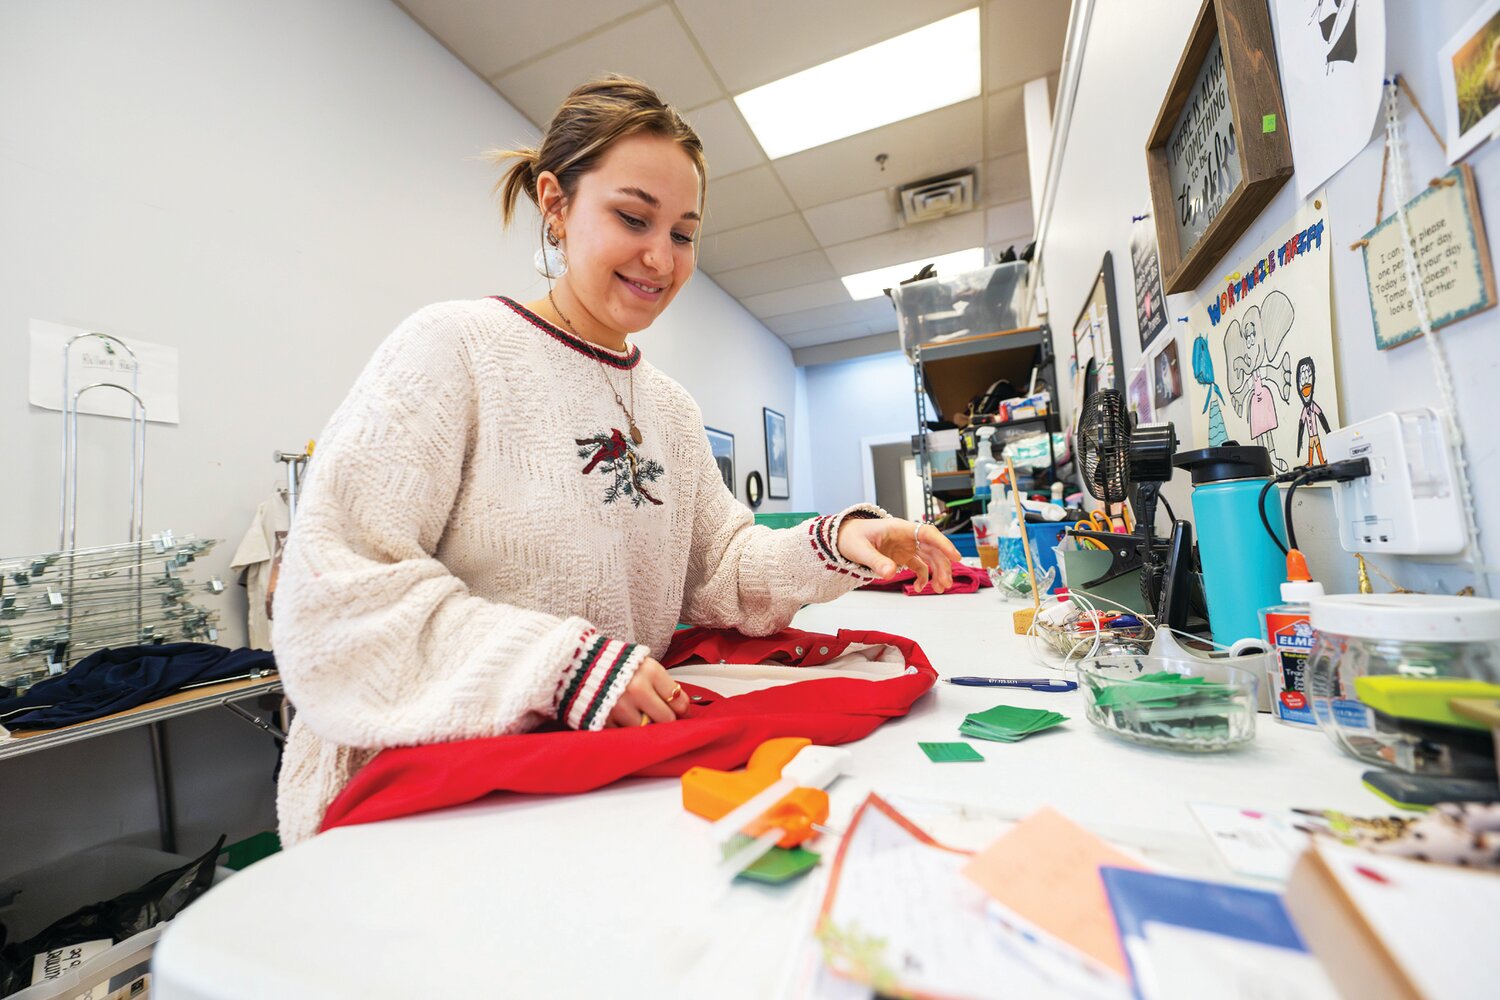 Hannah McKenney tags clothes with prices so they can be displayed and sold at Worthwhile Thrift, a nonprofit working to end modern day slavery.